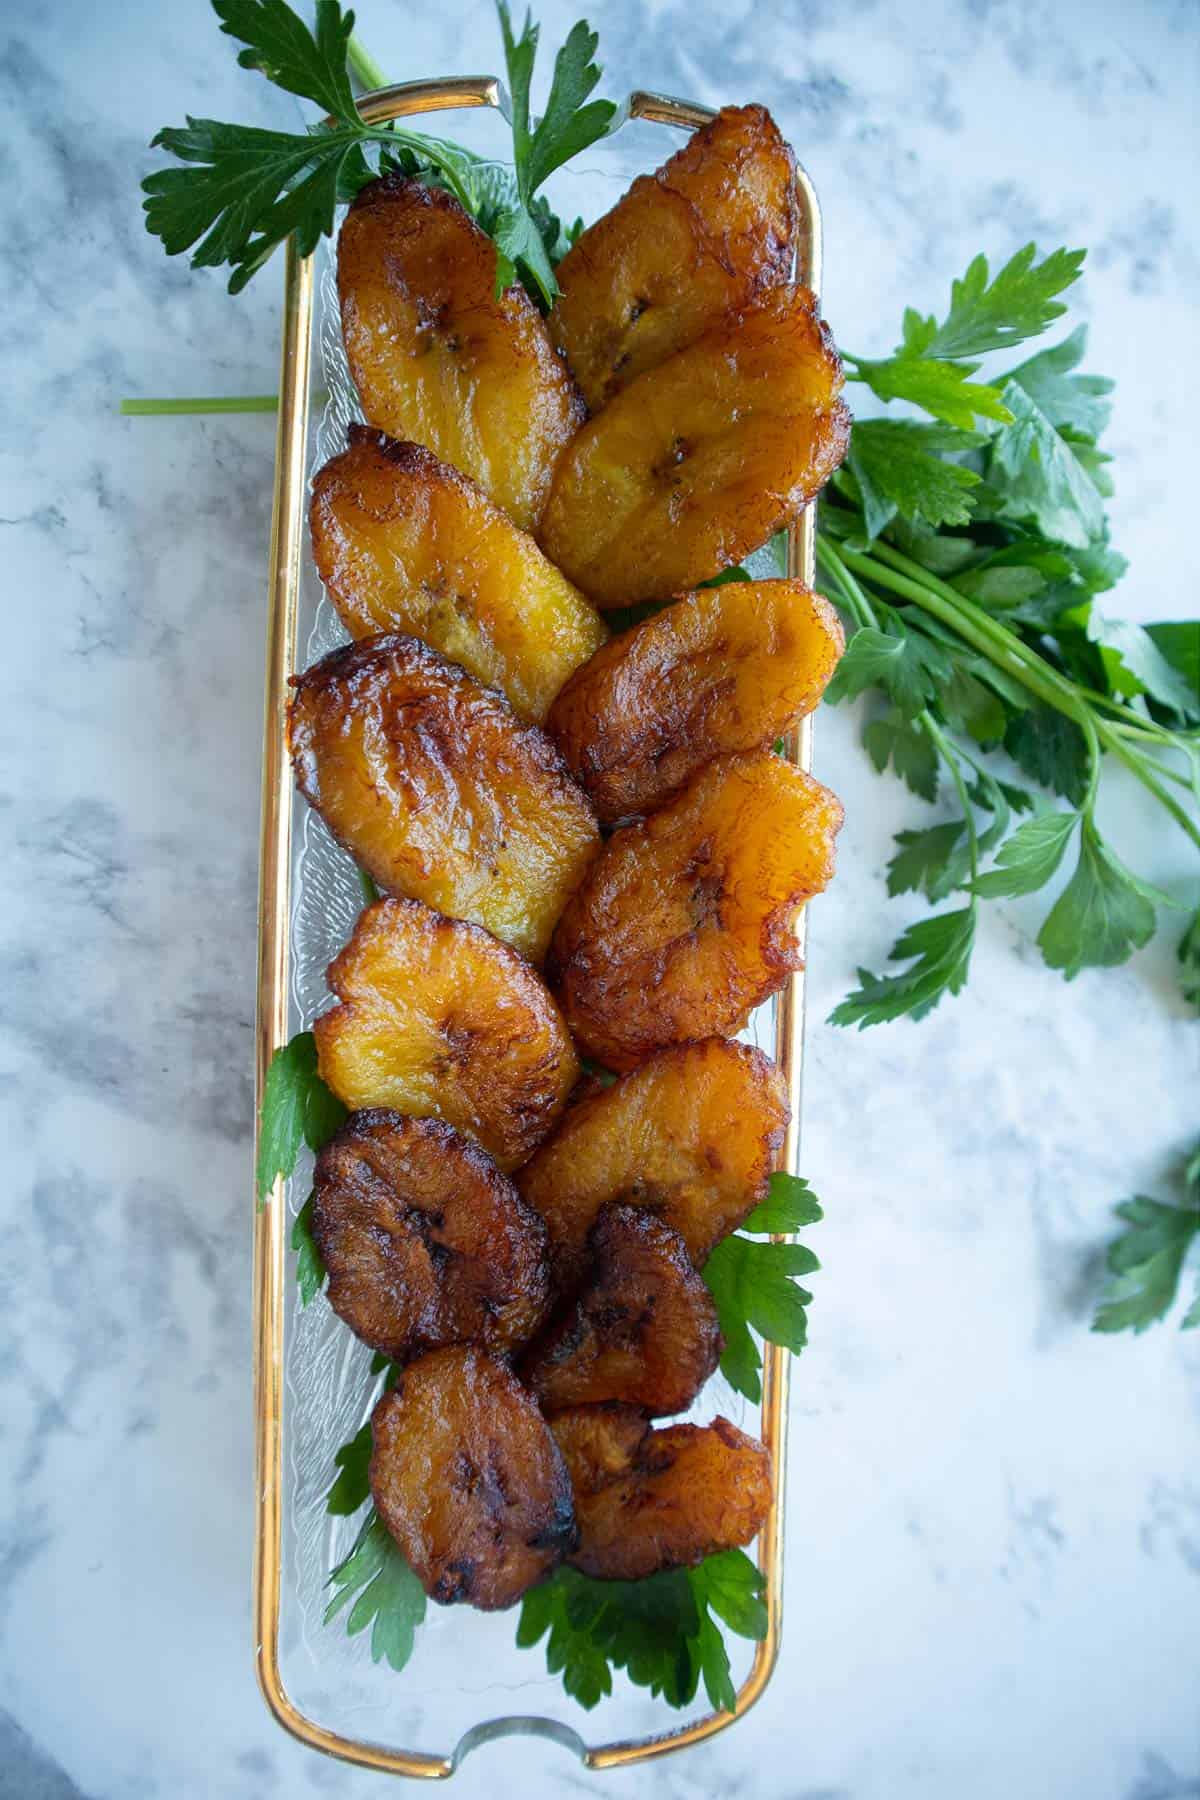 fried plantains in a long glass dish garnished with parsley.